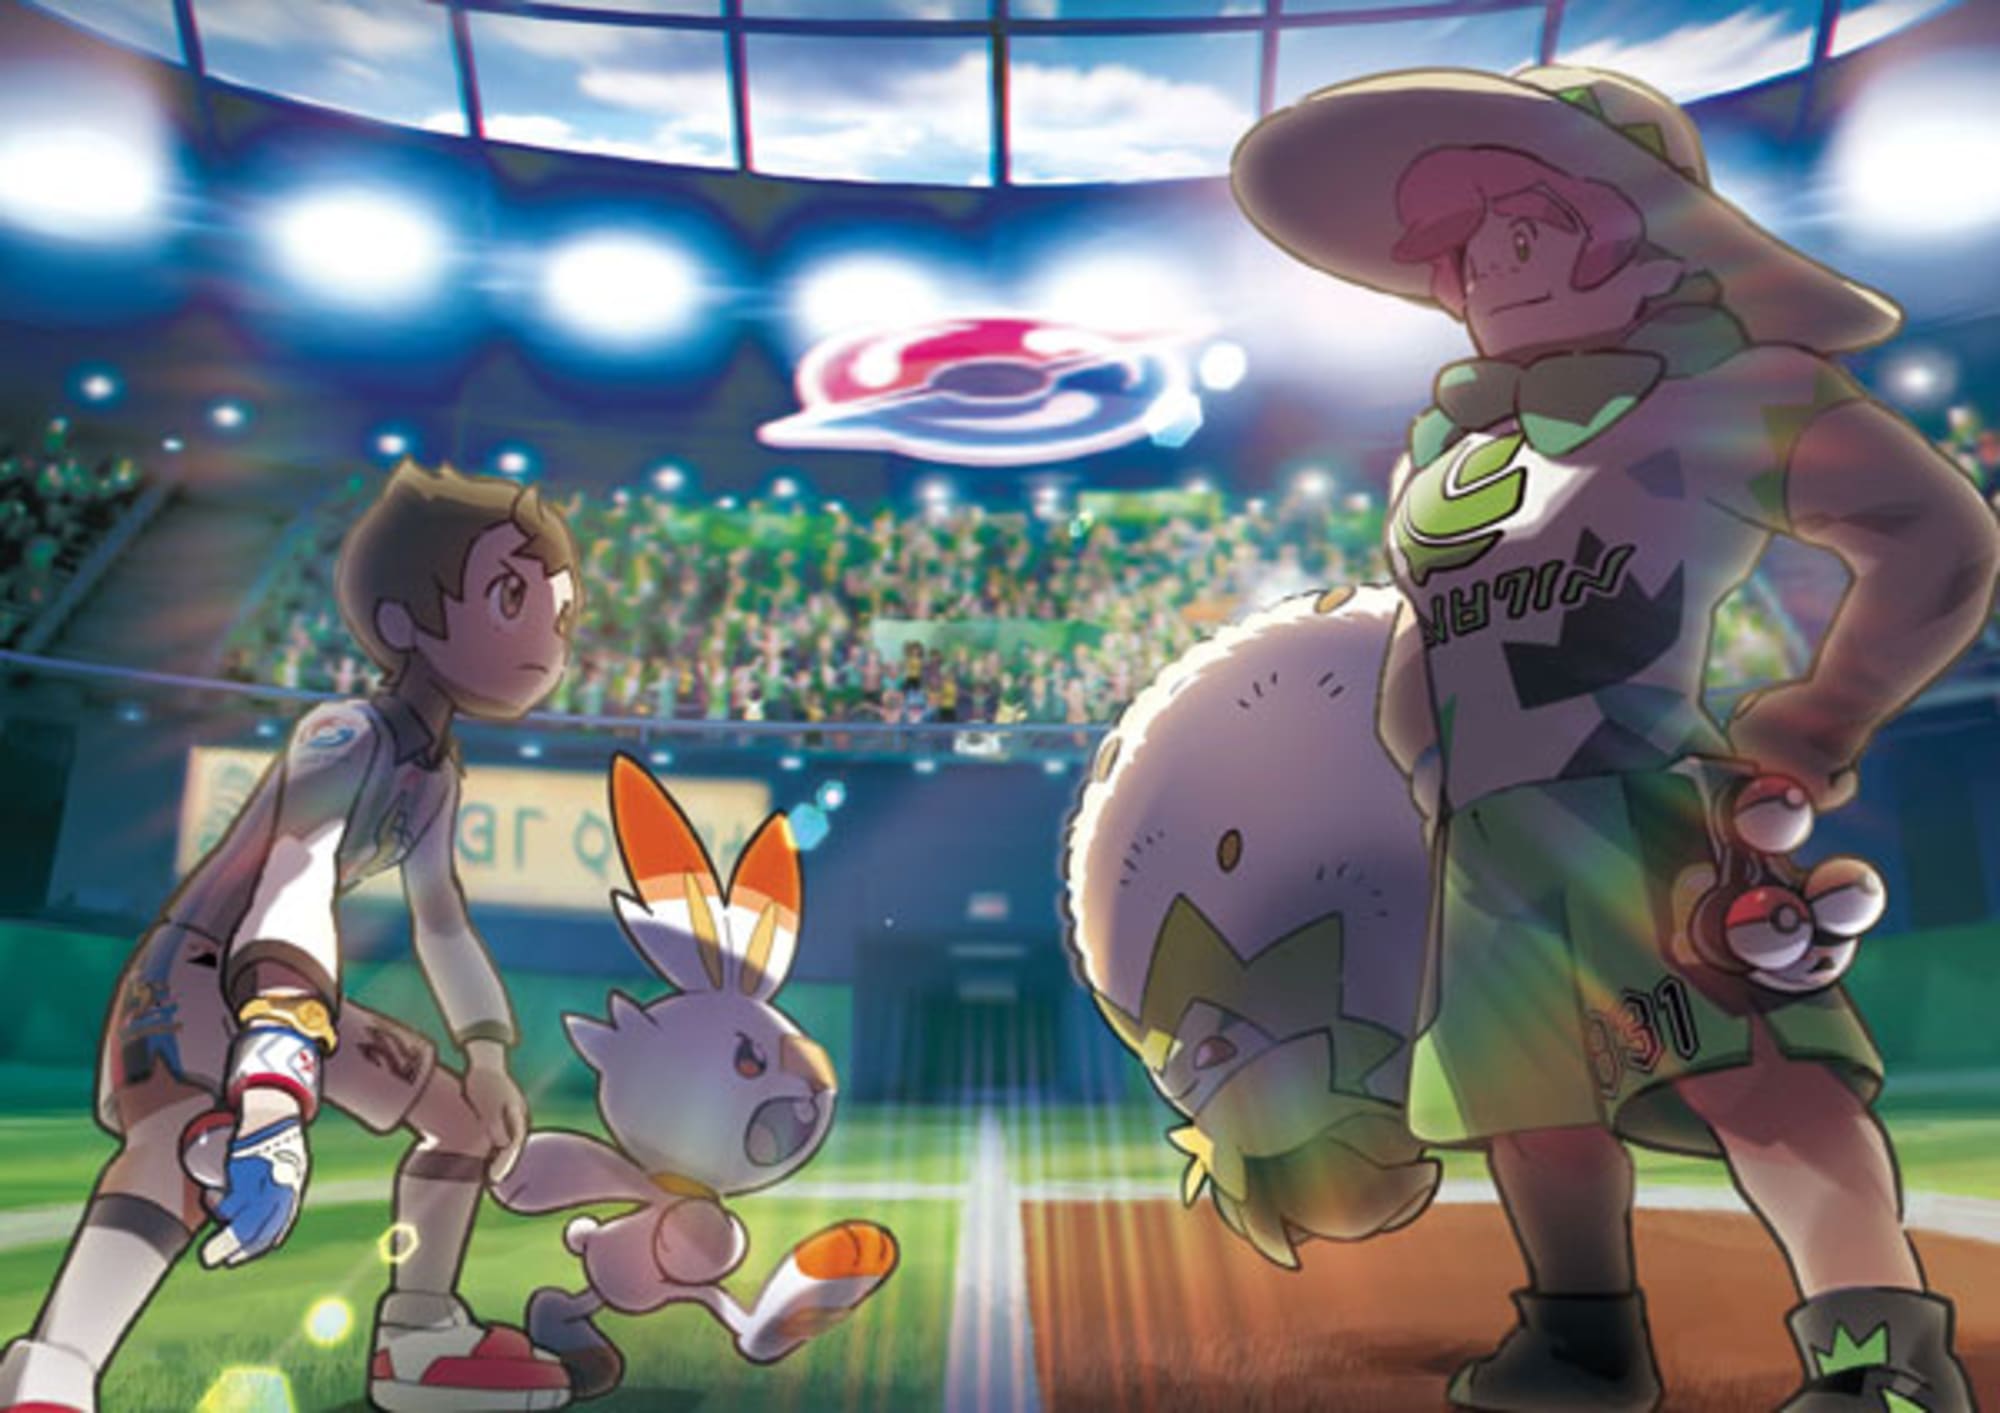 Pokemon Sword and Shield: New creatures, gym leaders & more